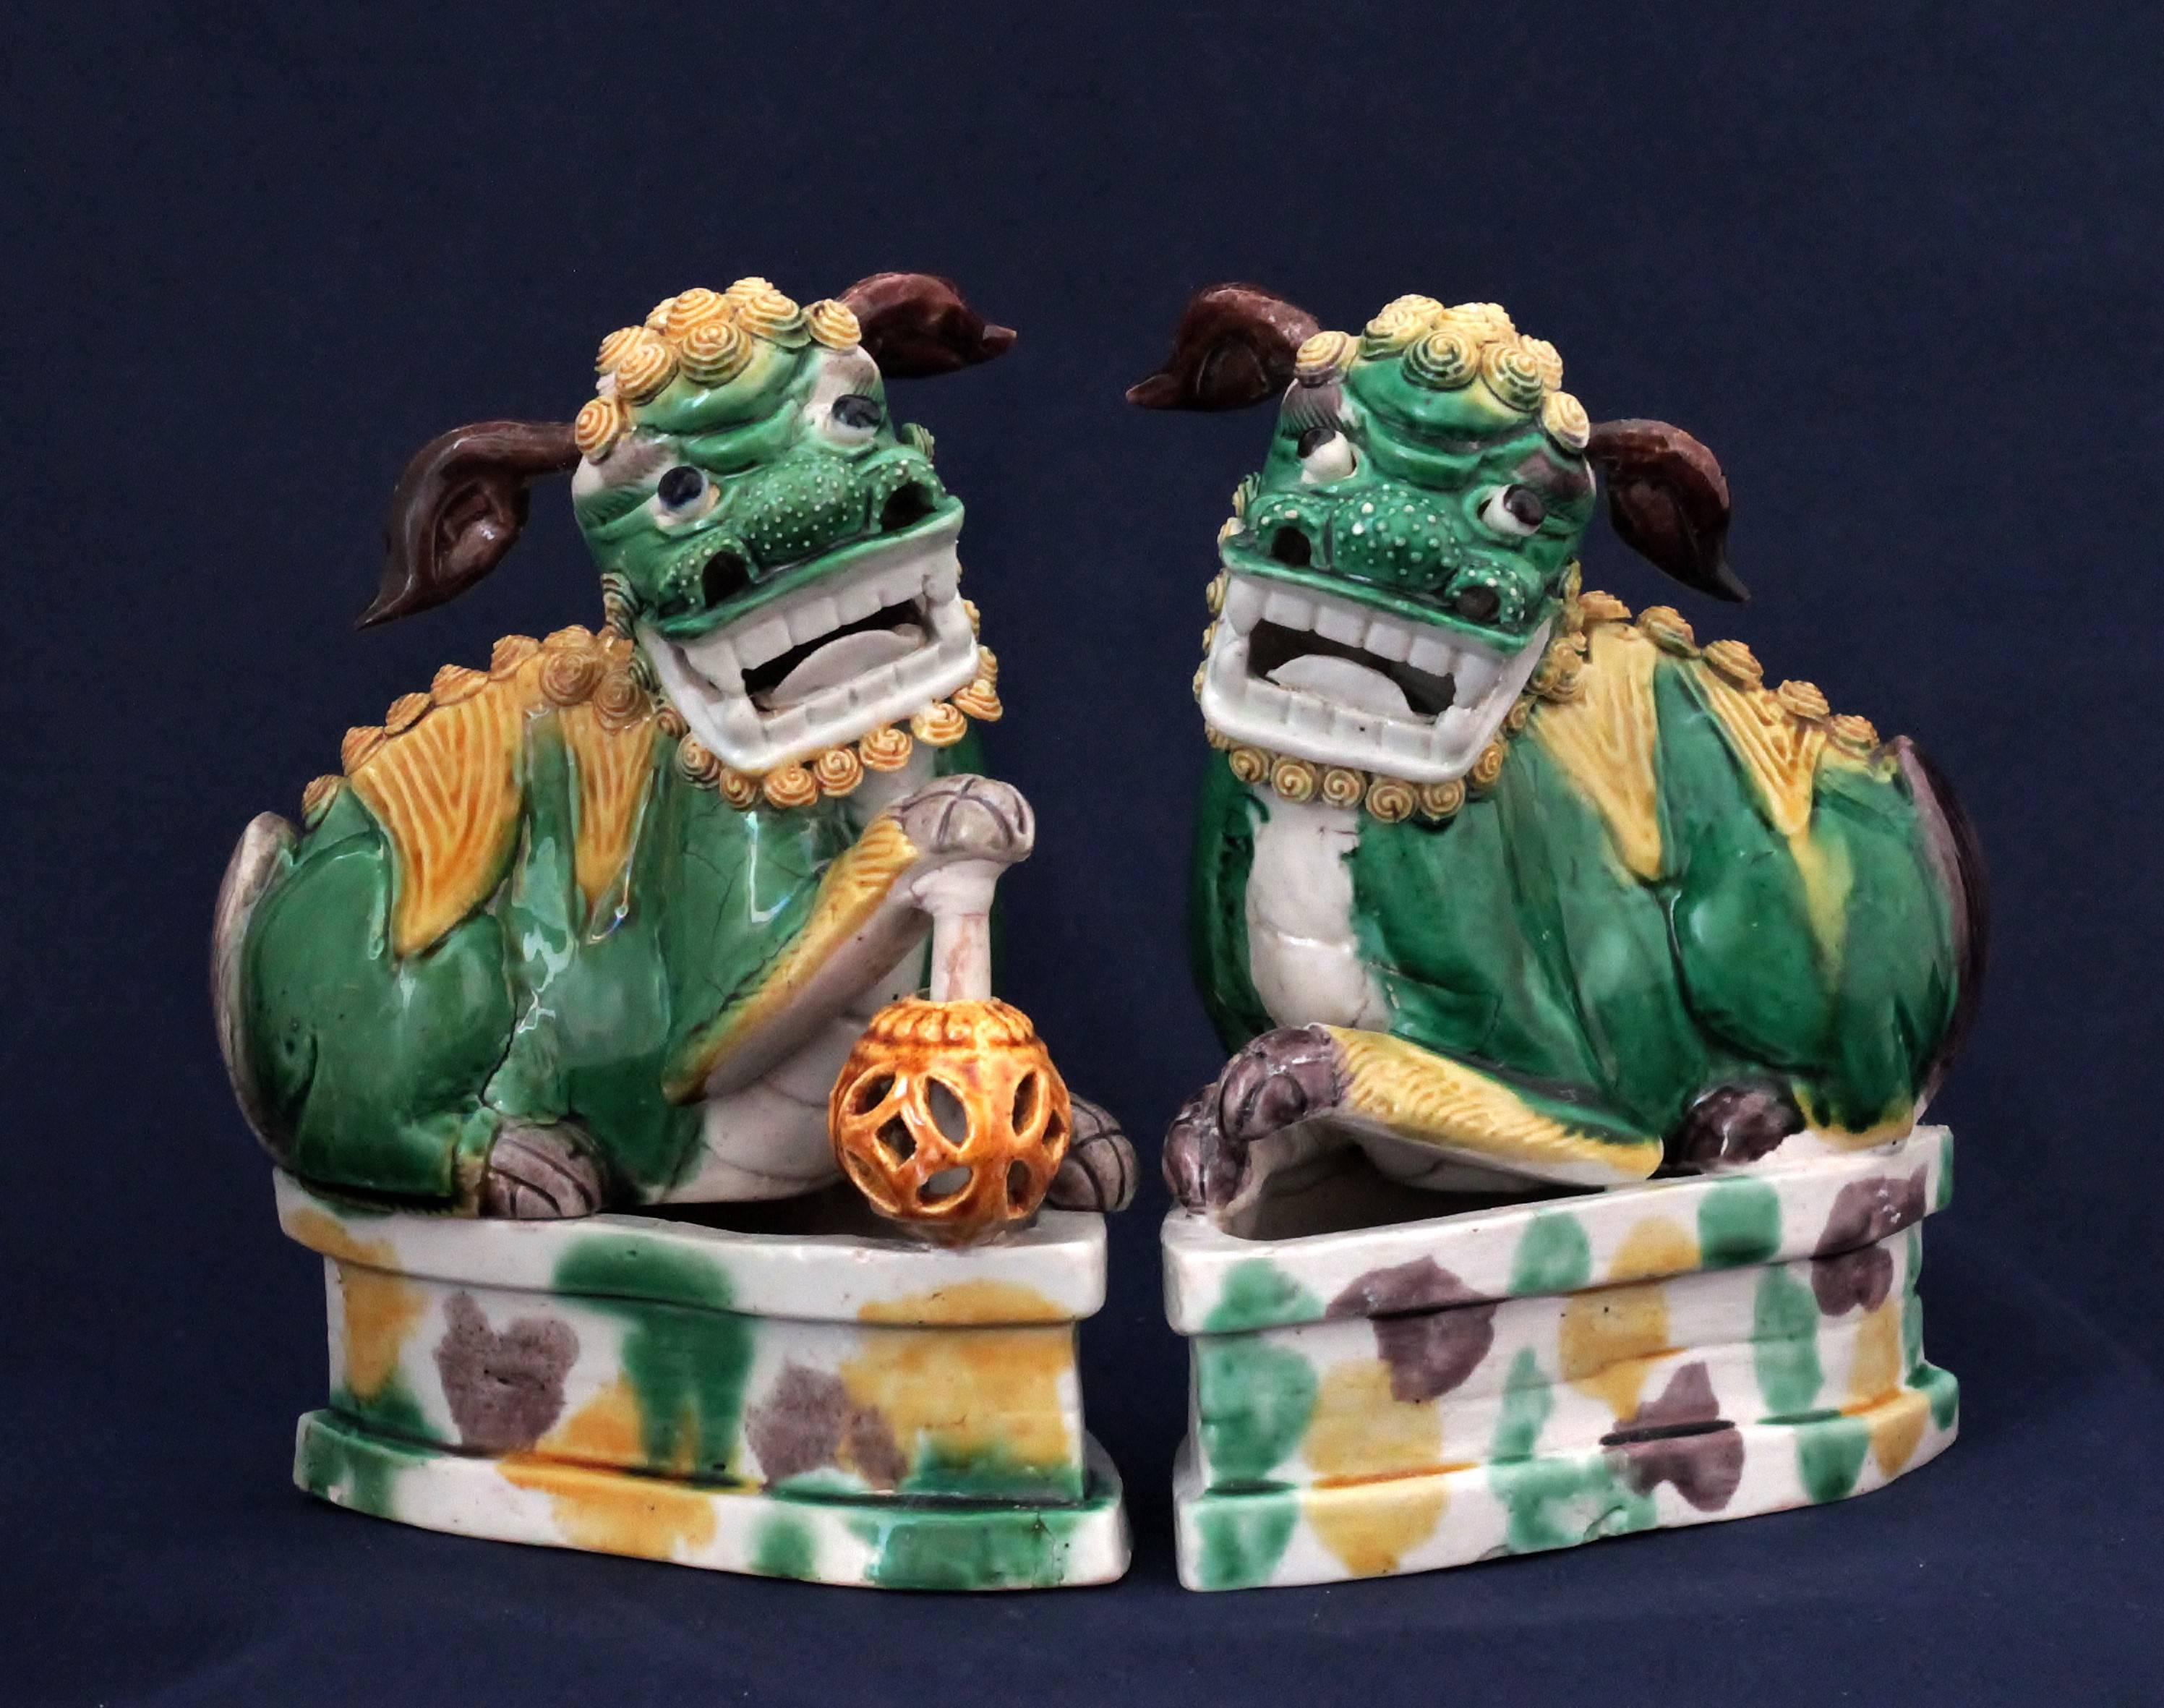 A pair of Buddhist lions said “shi-shi” in enamelled biscuit with “Harlequin” colors (yellow, green and brown). The lions are slept on the bases, the ears and the ball are moving.
Measures: Height: 15.3 cm, width: 13.5, depth: 8 cm.
One ear